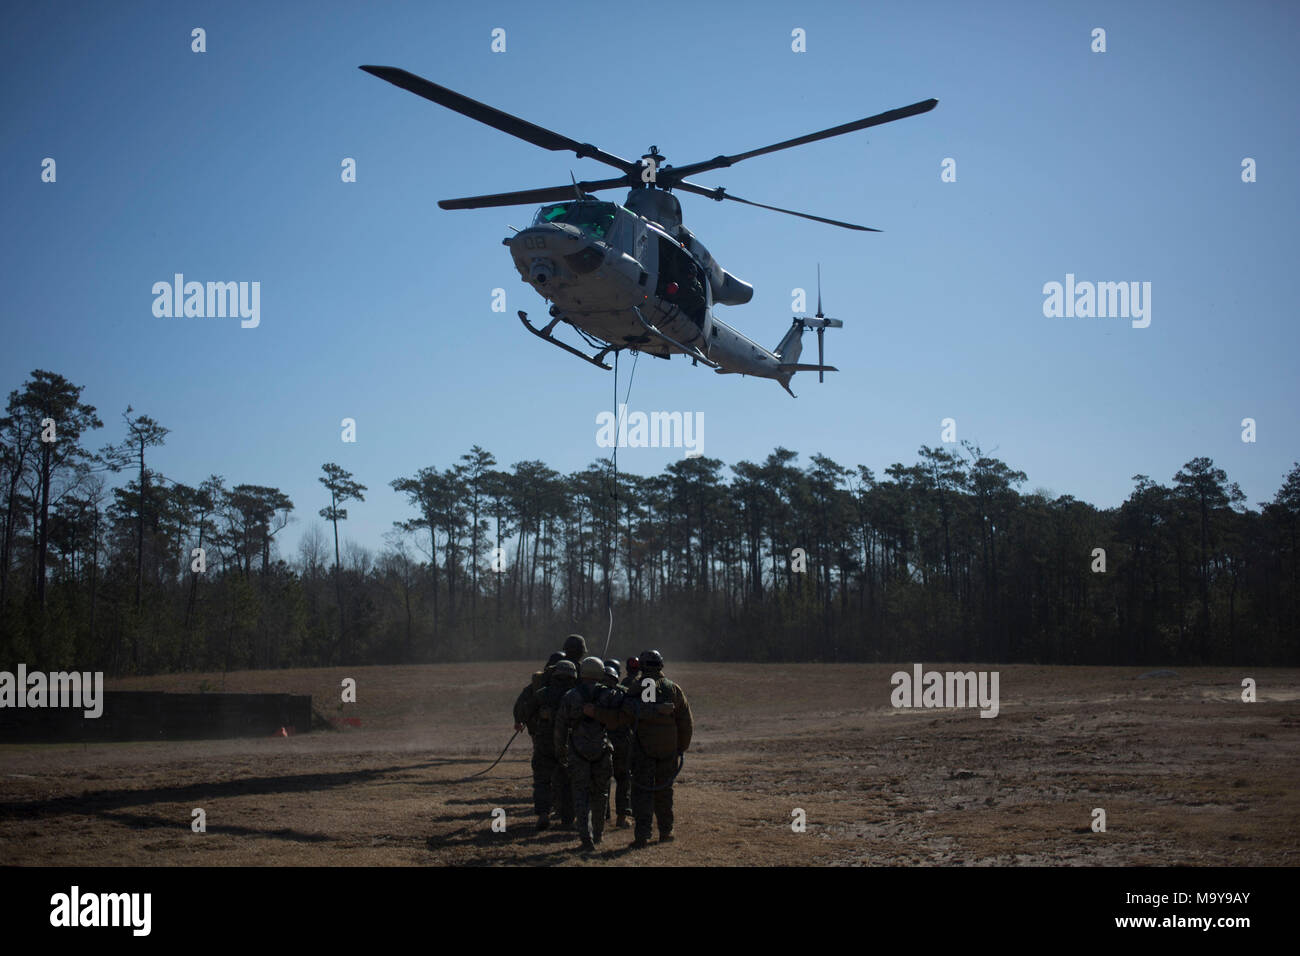 U.S. Marines with II Marine Expeditionary Force Information Group prepare to take off during special patrol insertion and extraction operations training at Camp Lejeune, N.C., March 23, 2018. The Marines conducted the training to improve operational capabilities and to recertify helicopter rope suspension techniques masters from across II MEF. (U.S. Marine Corps photo by Pfc. Larisa Chavez) Stock Photo